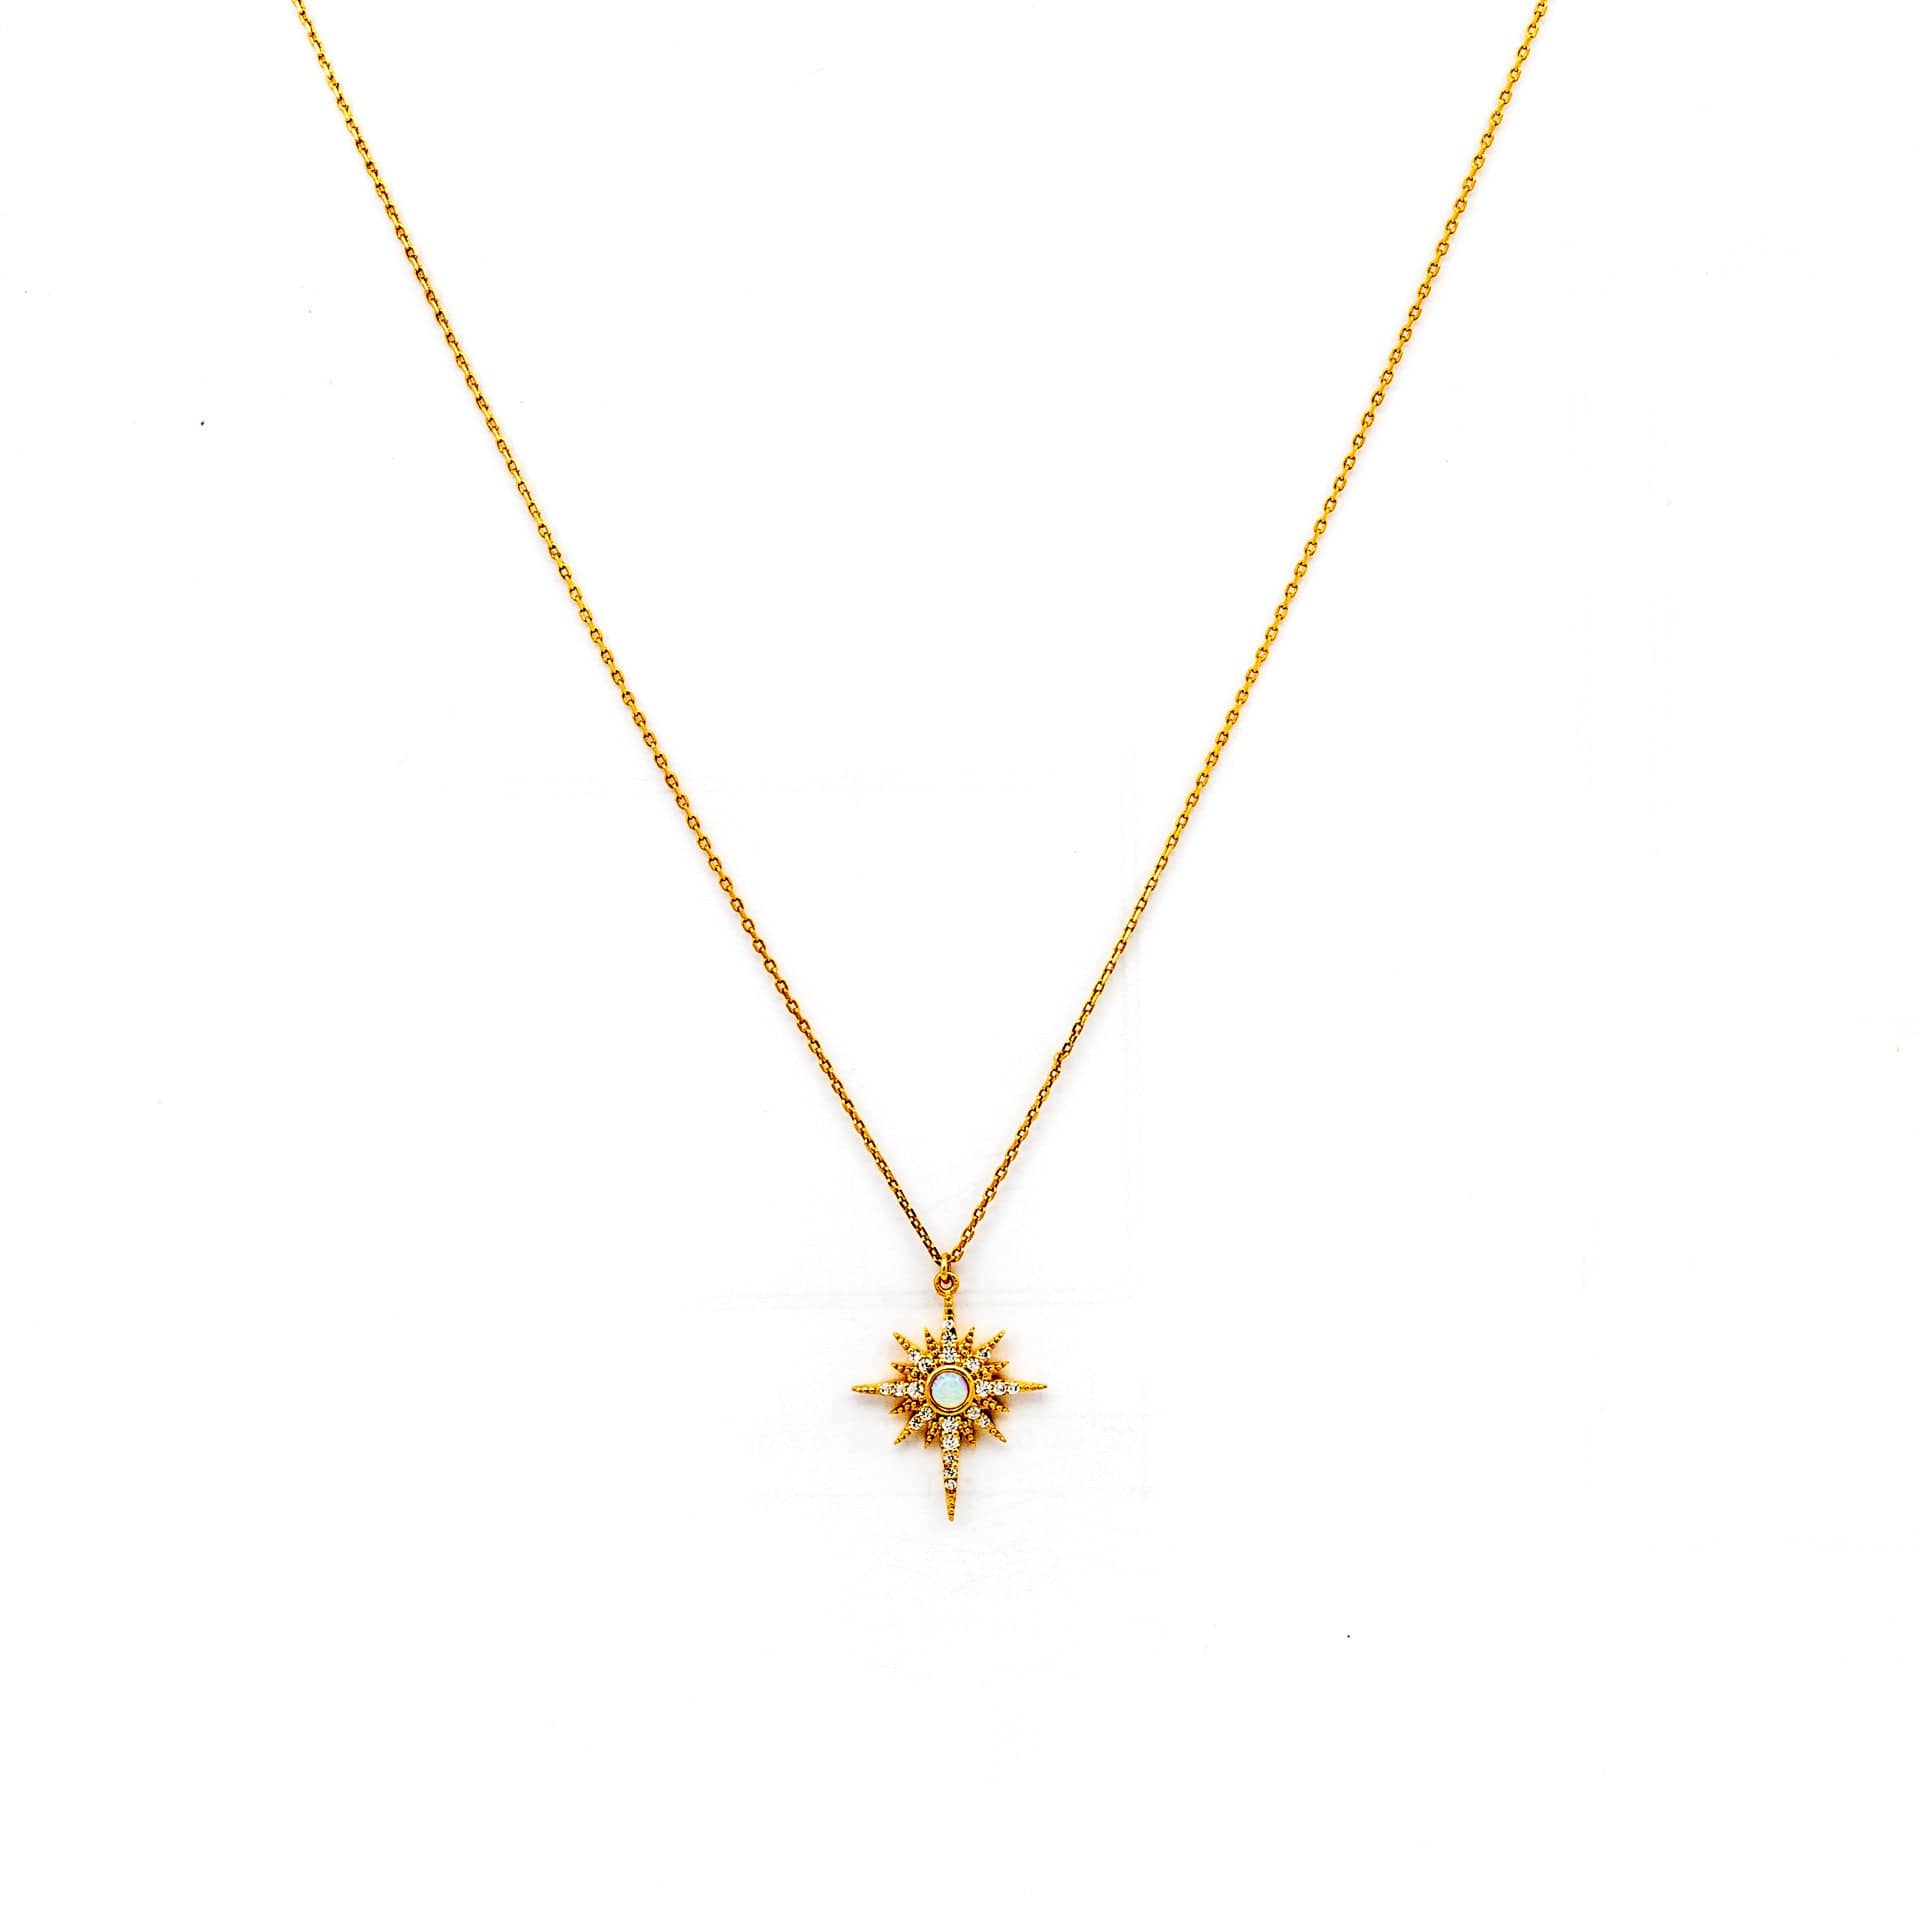 TAI JEWELRY Necklace Gold Starburst With Opal Stone Center